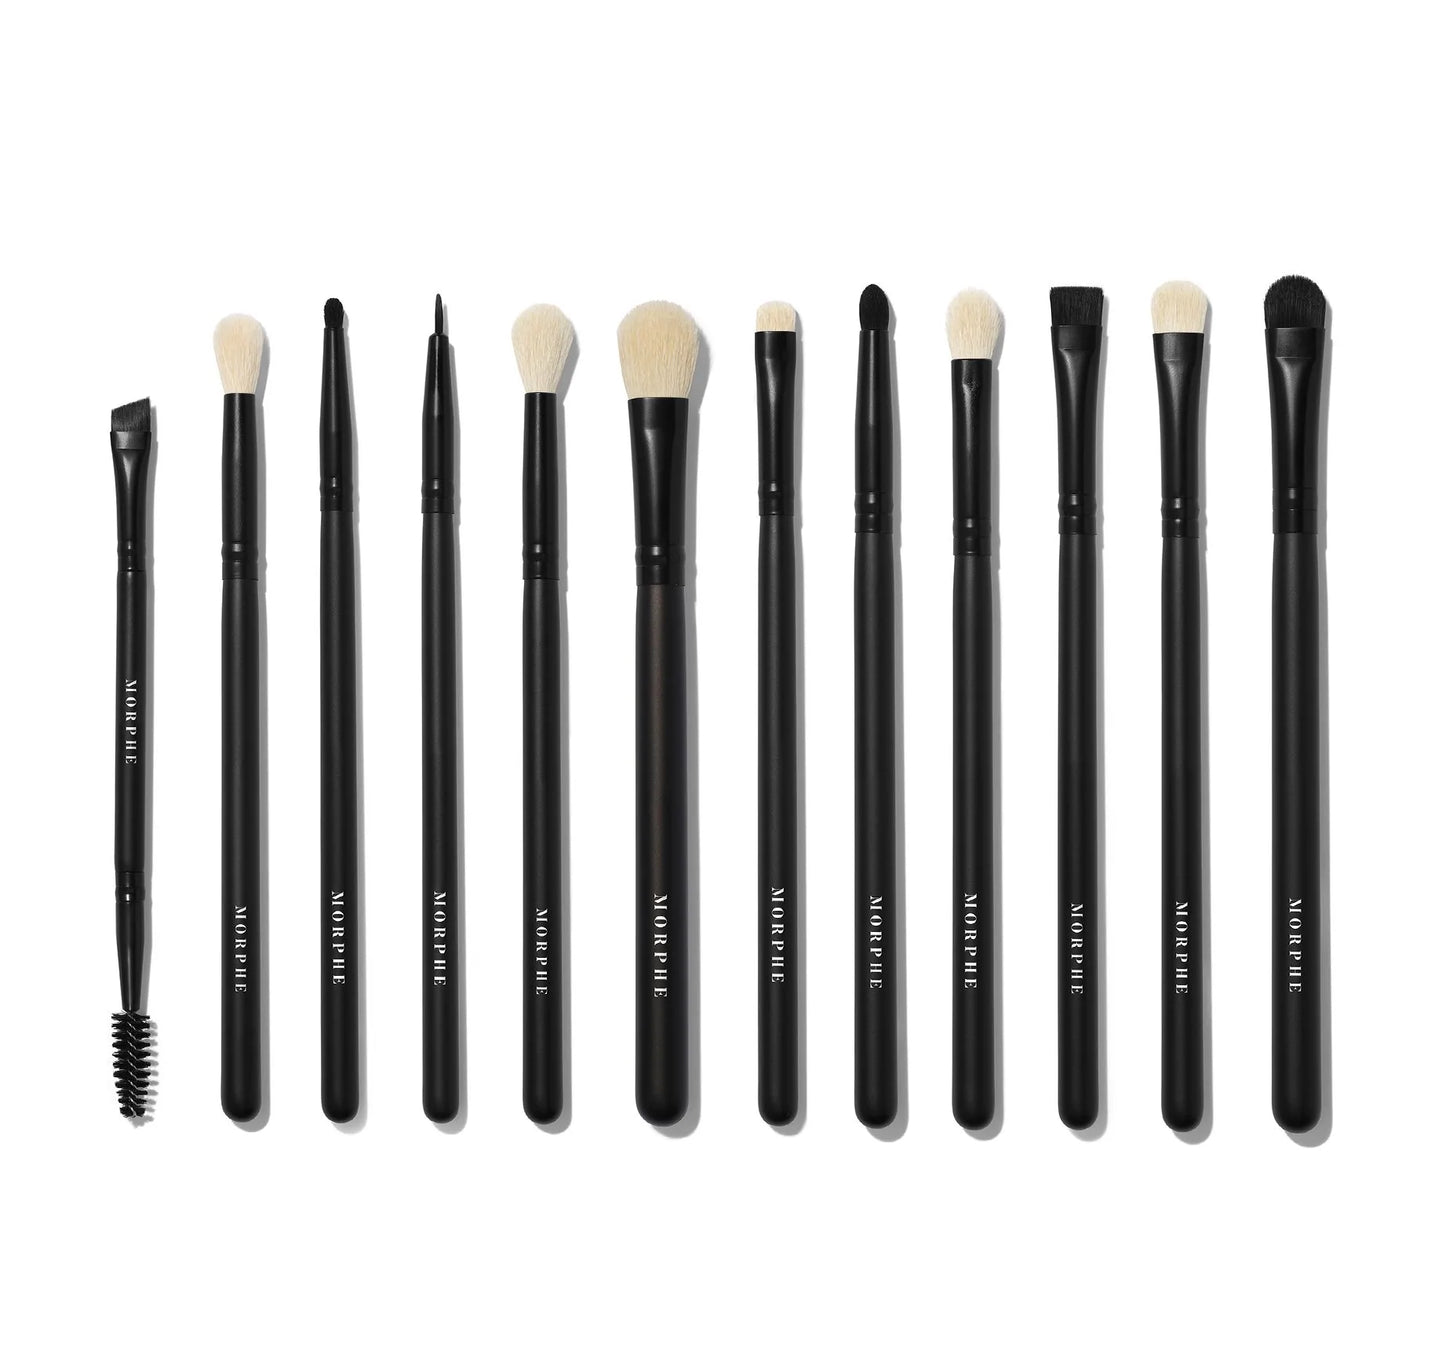 Eye Obsessed brush collection - Morphe